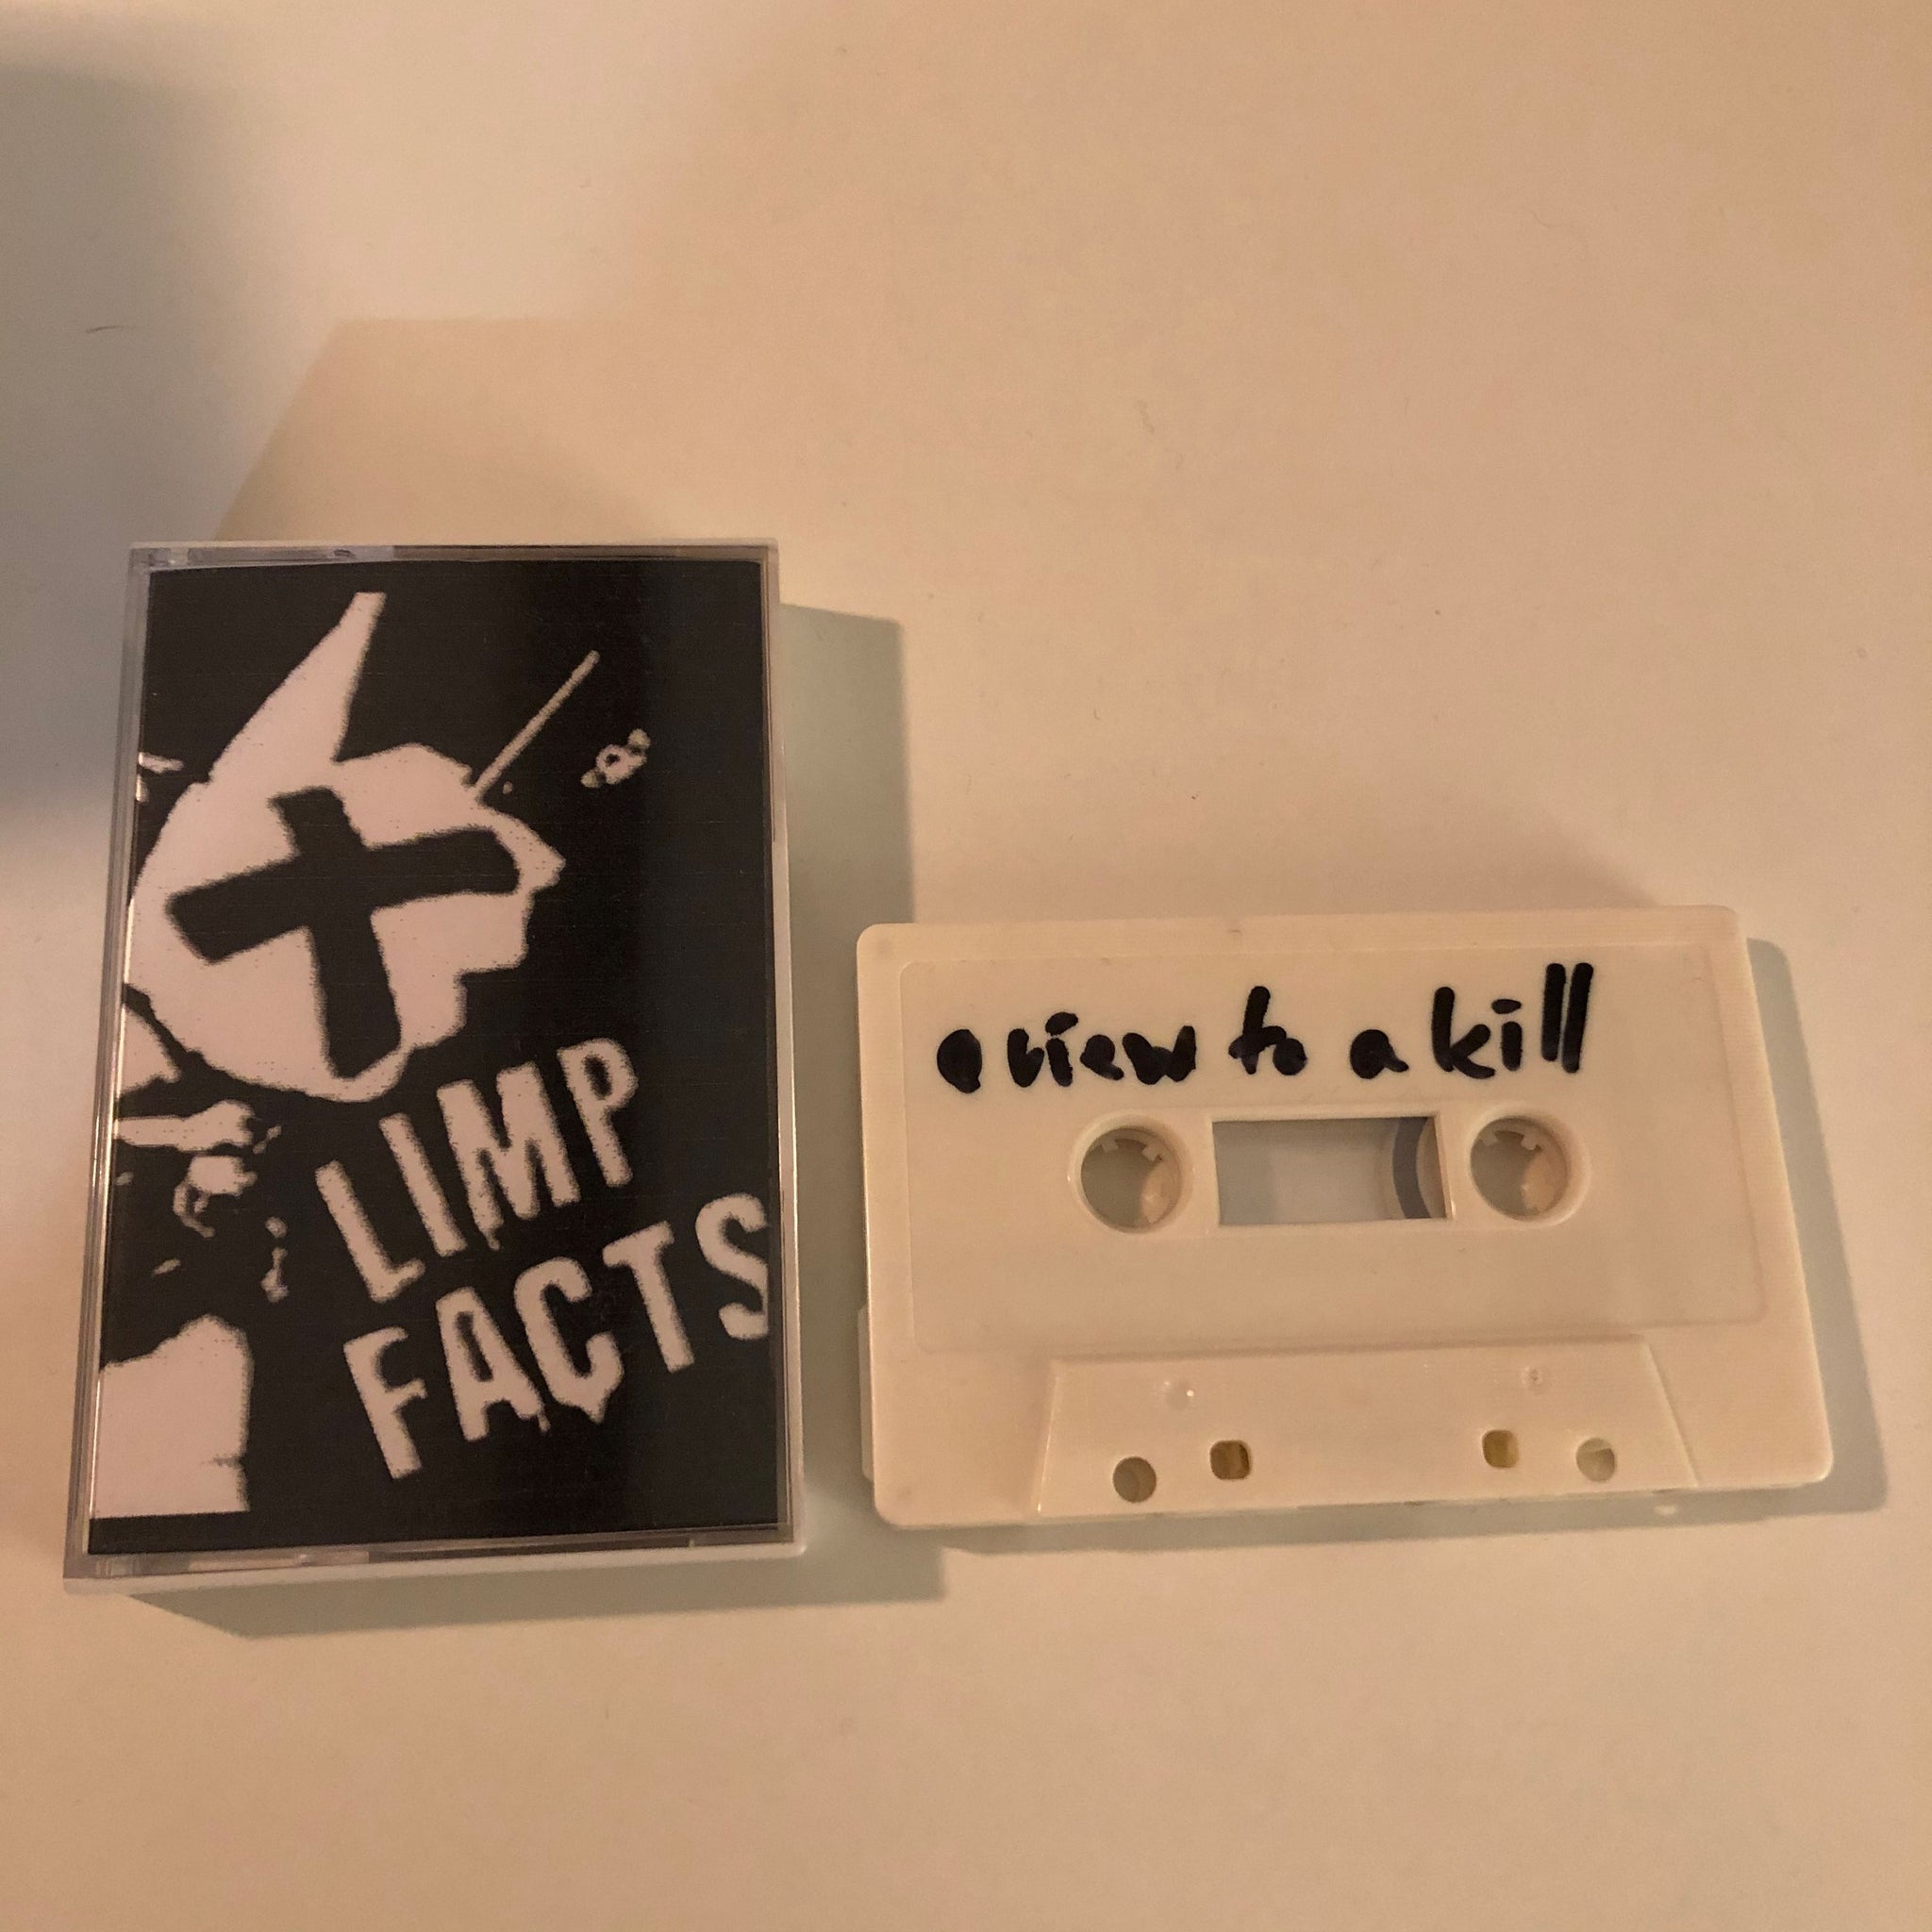 THE FACTS • A View To A Kill • LIMP WRIST Cover • Tape